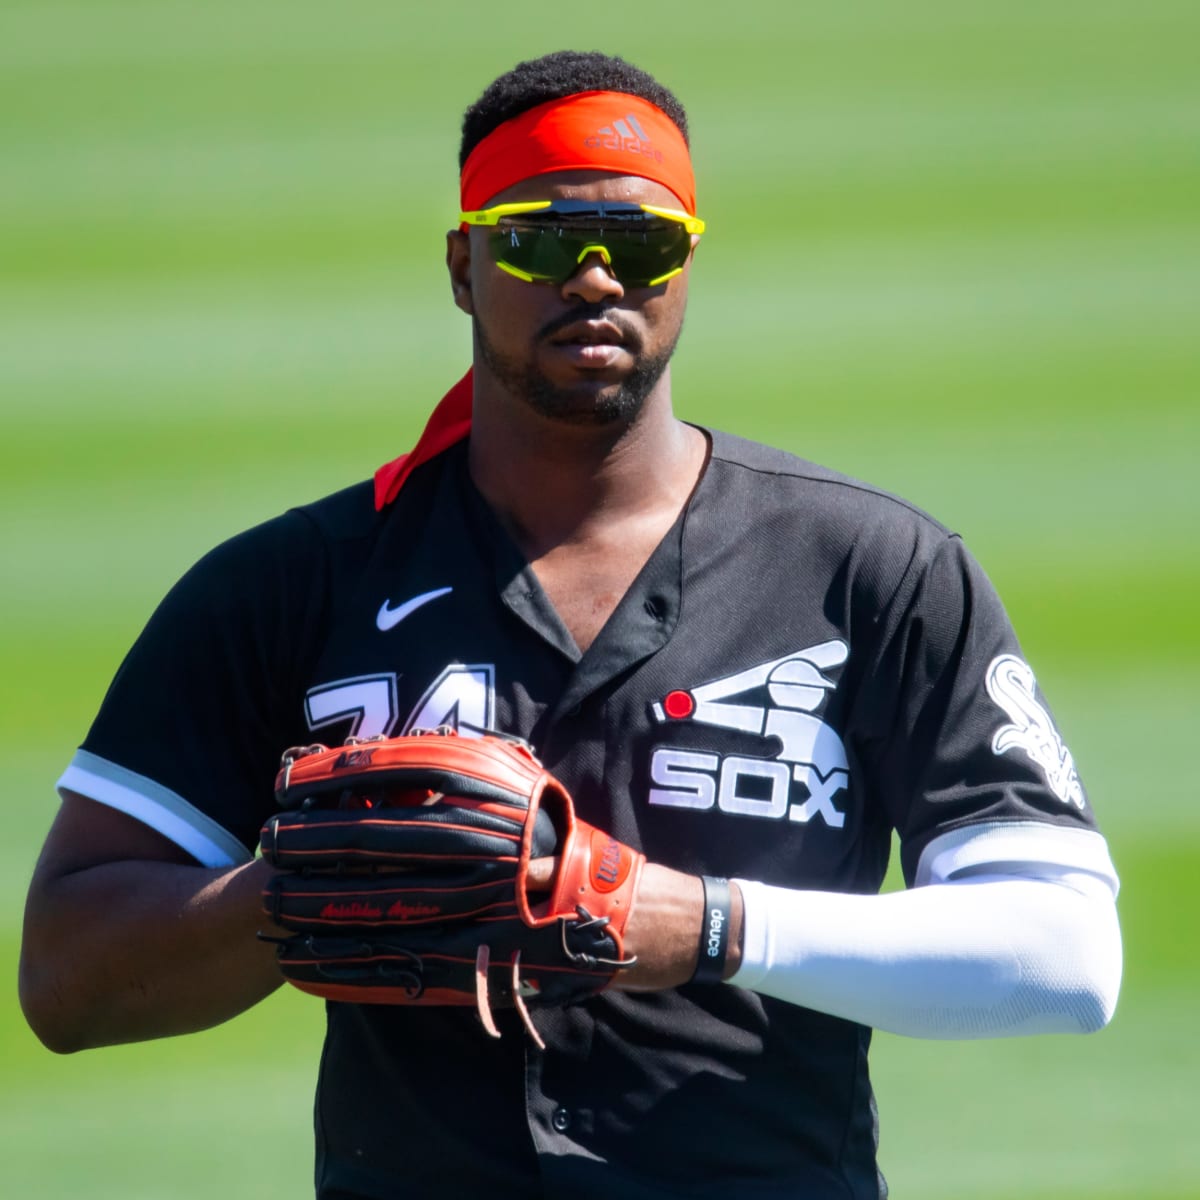 Eloy Jimenez is expected to make his 2021 Chicago White Sox debut Monday